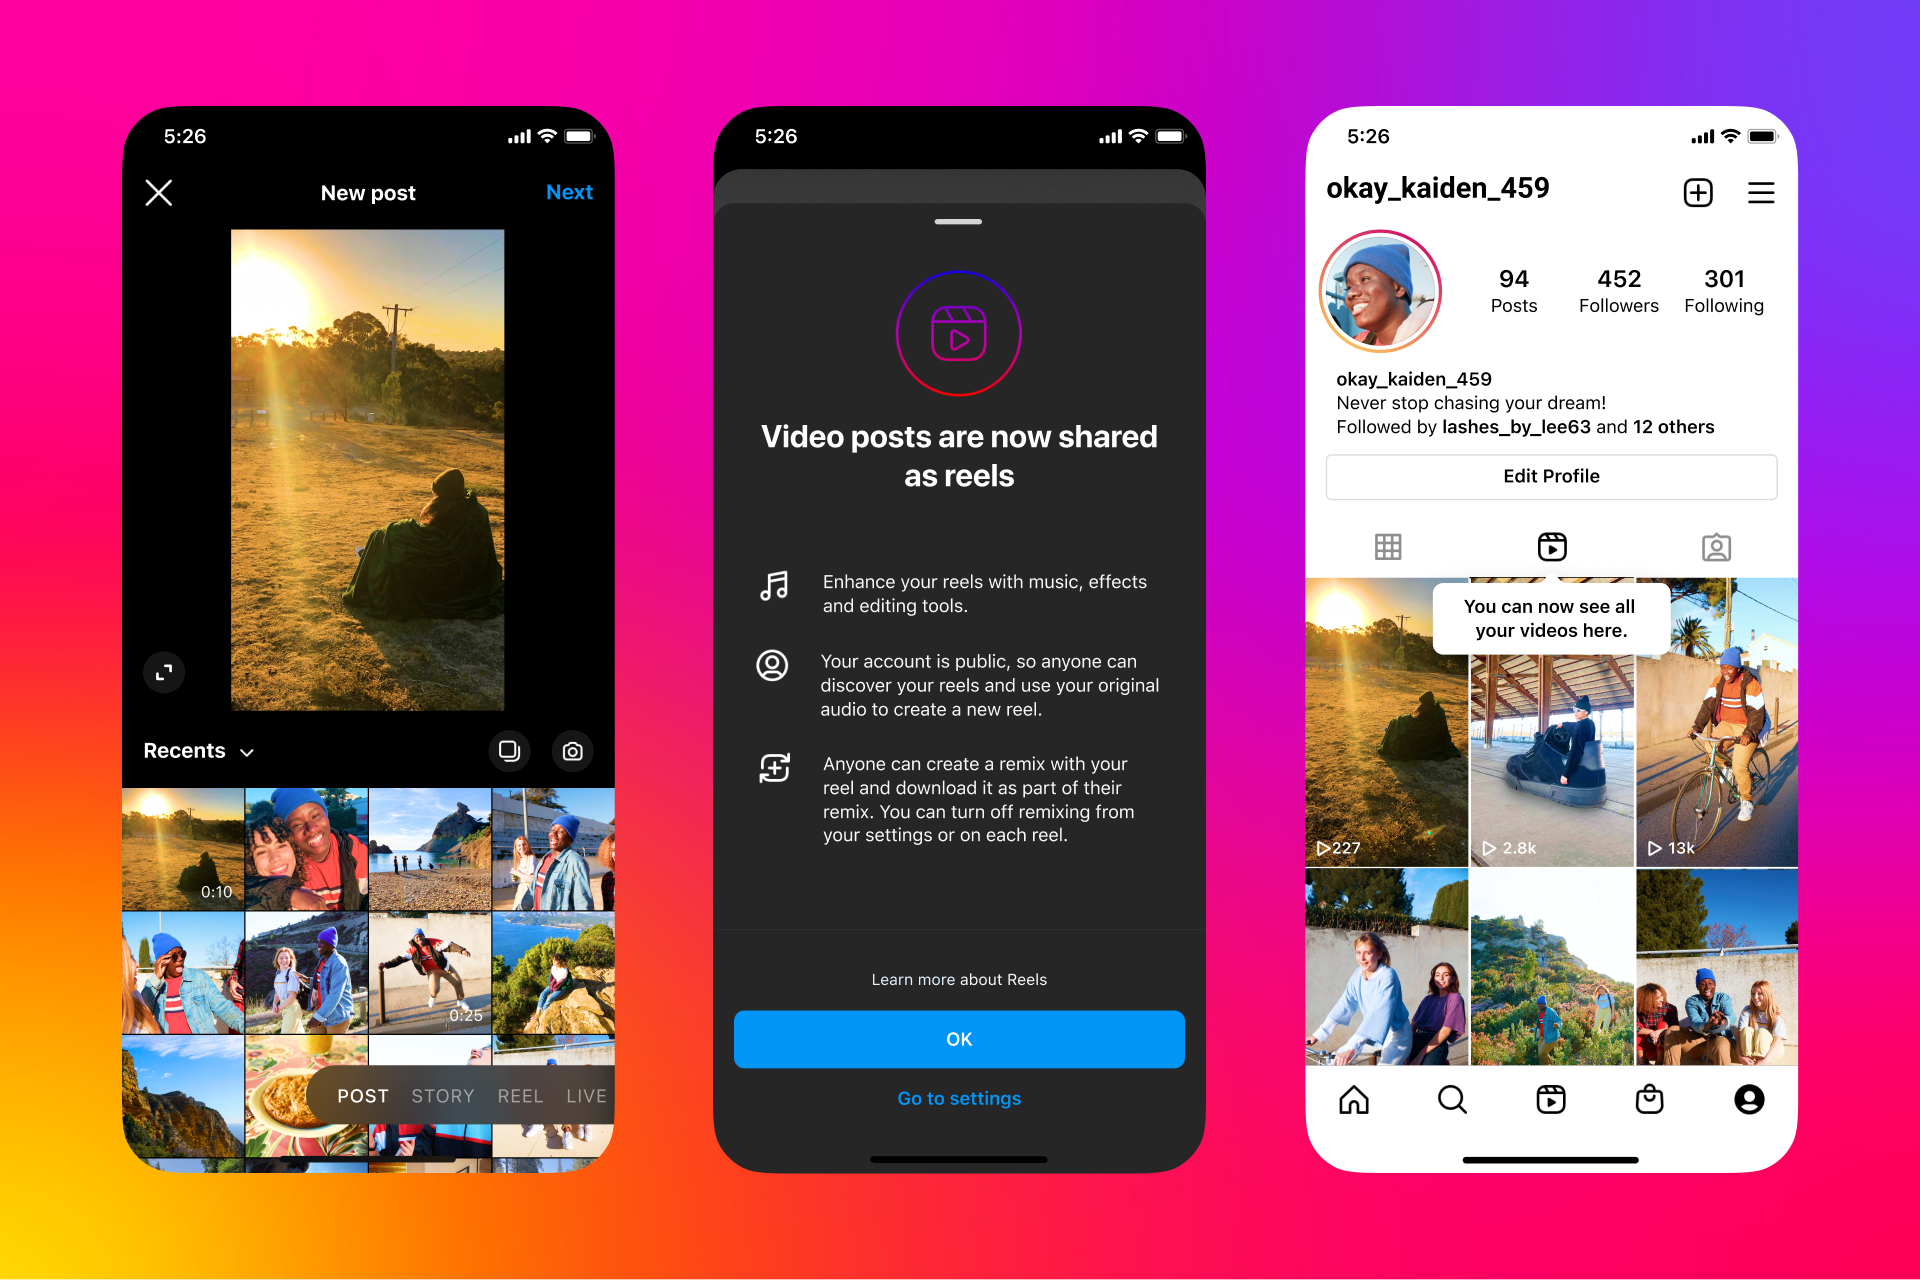 “All videos moving forward on Instagram are going to be Reels” says Head of Instagram